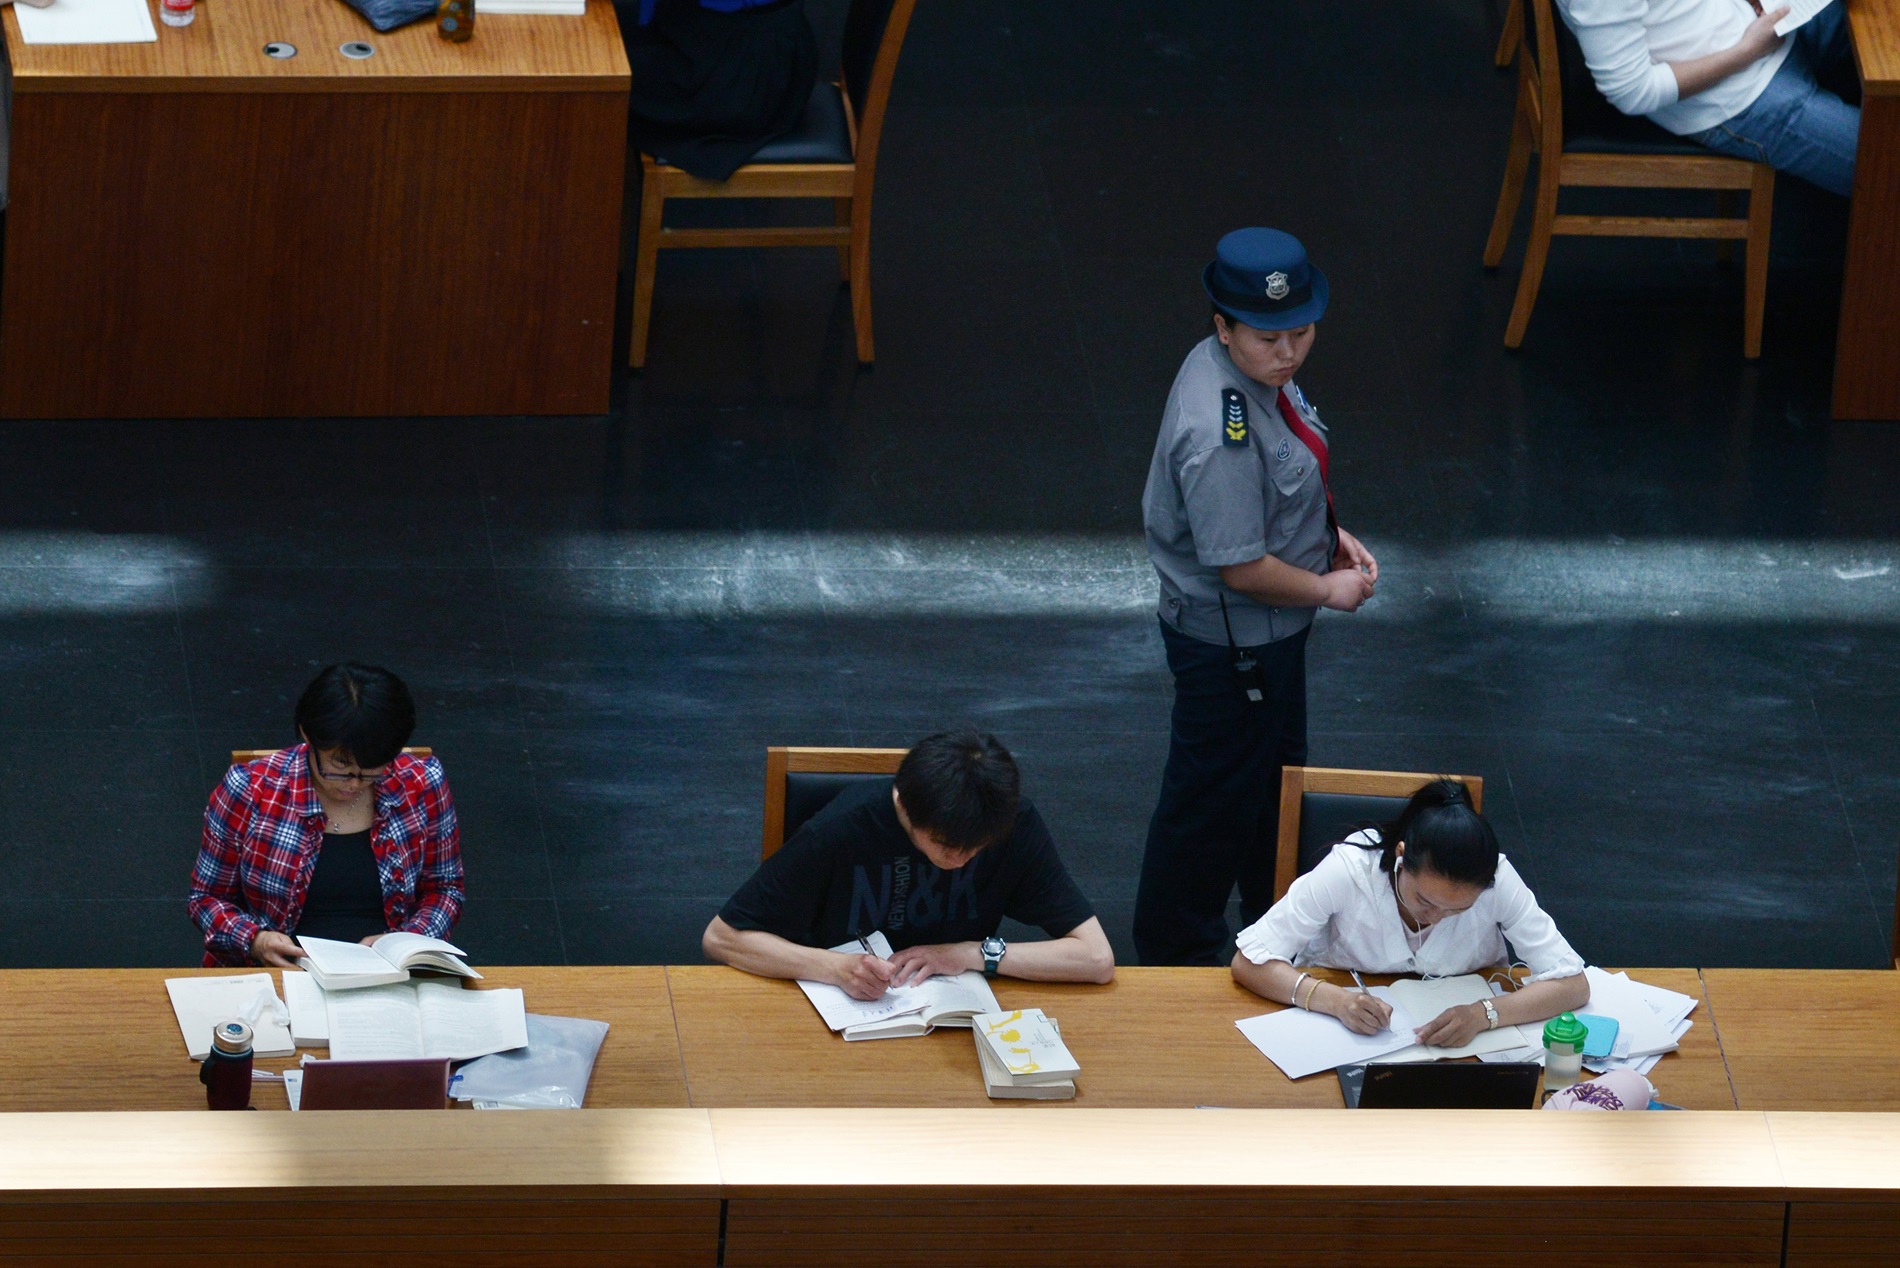 What Will Newly Increased Party Control Mean for China’s Universities?